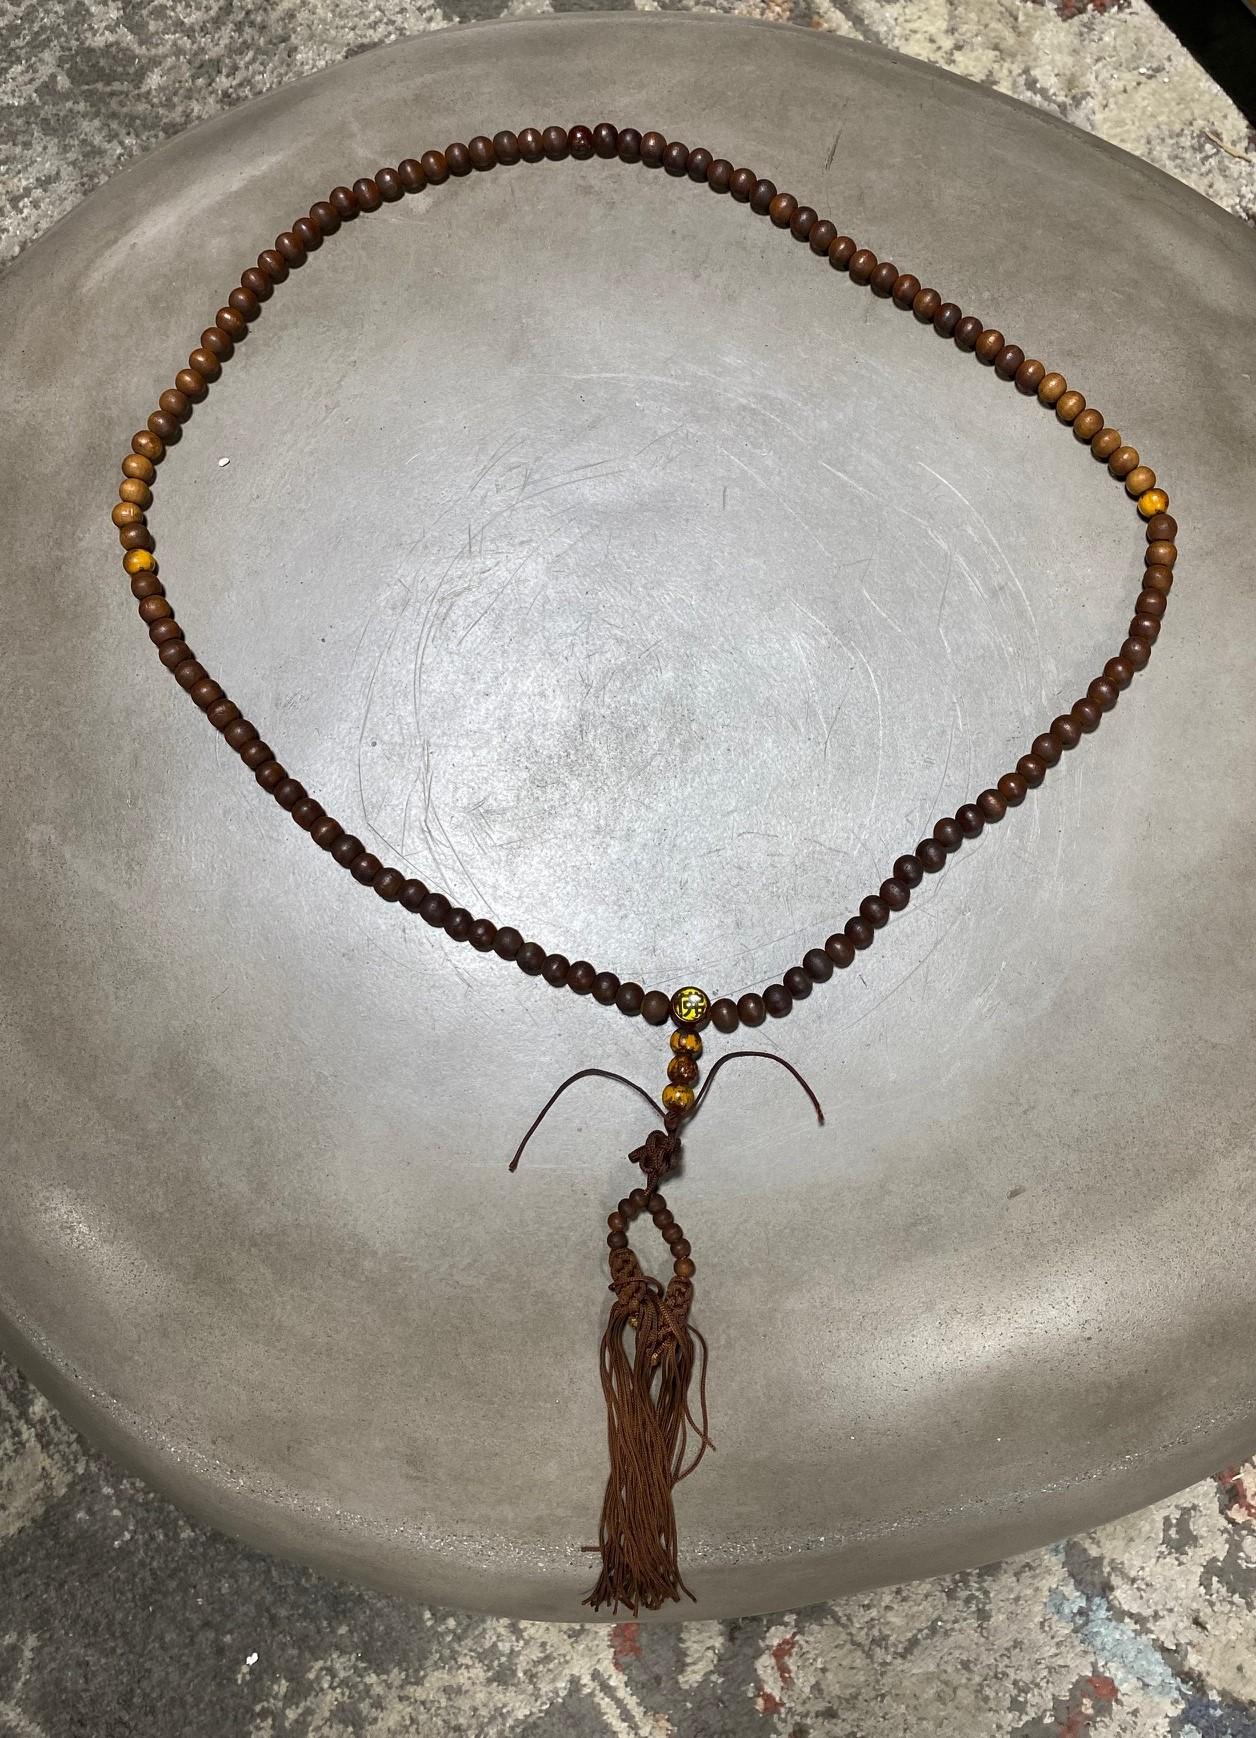 A beautiful string of Japanese hand-crafted natural wooden Buddhist Juzu mala beads made of wood, except for the large one which has glass insets. The kanji on one side of the glass is, 